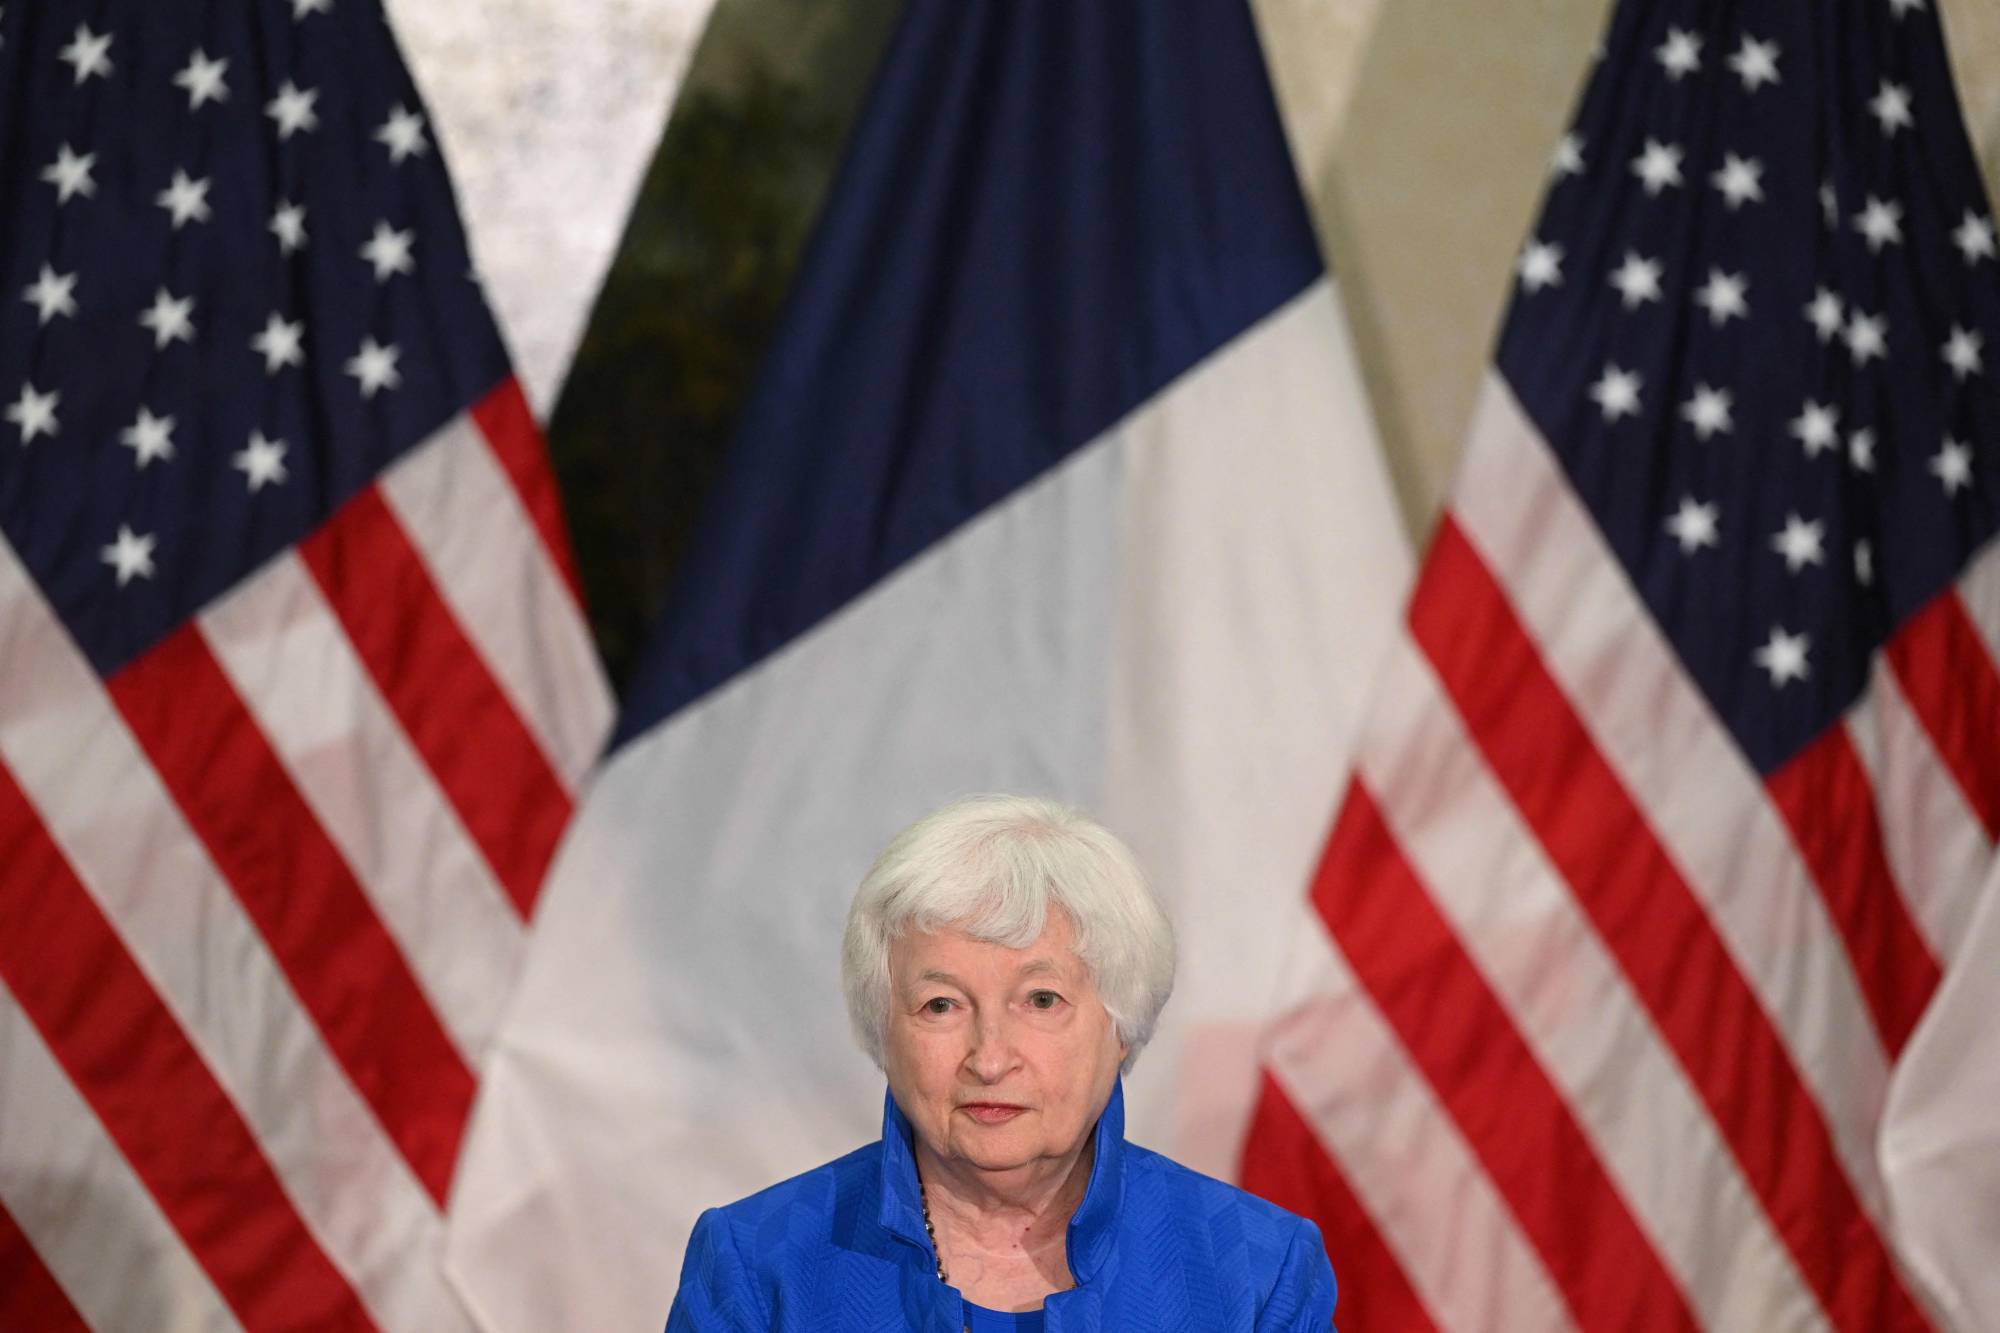 U.S. Treasury Secretary Janet Yellen delivers remarks during a news conference at the U.S. Embassy in Paris on June 22. | AFP-JIJI